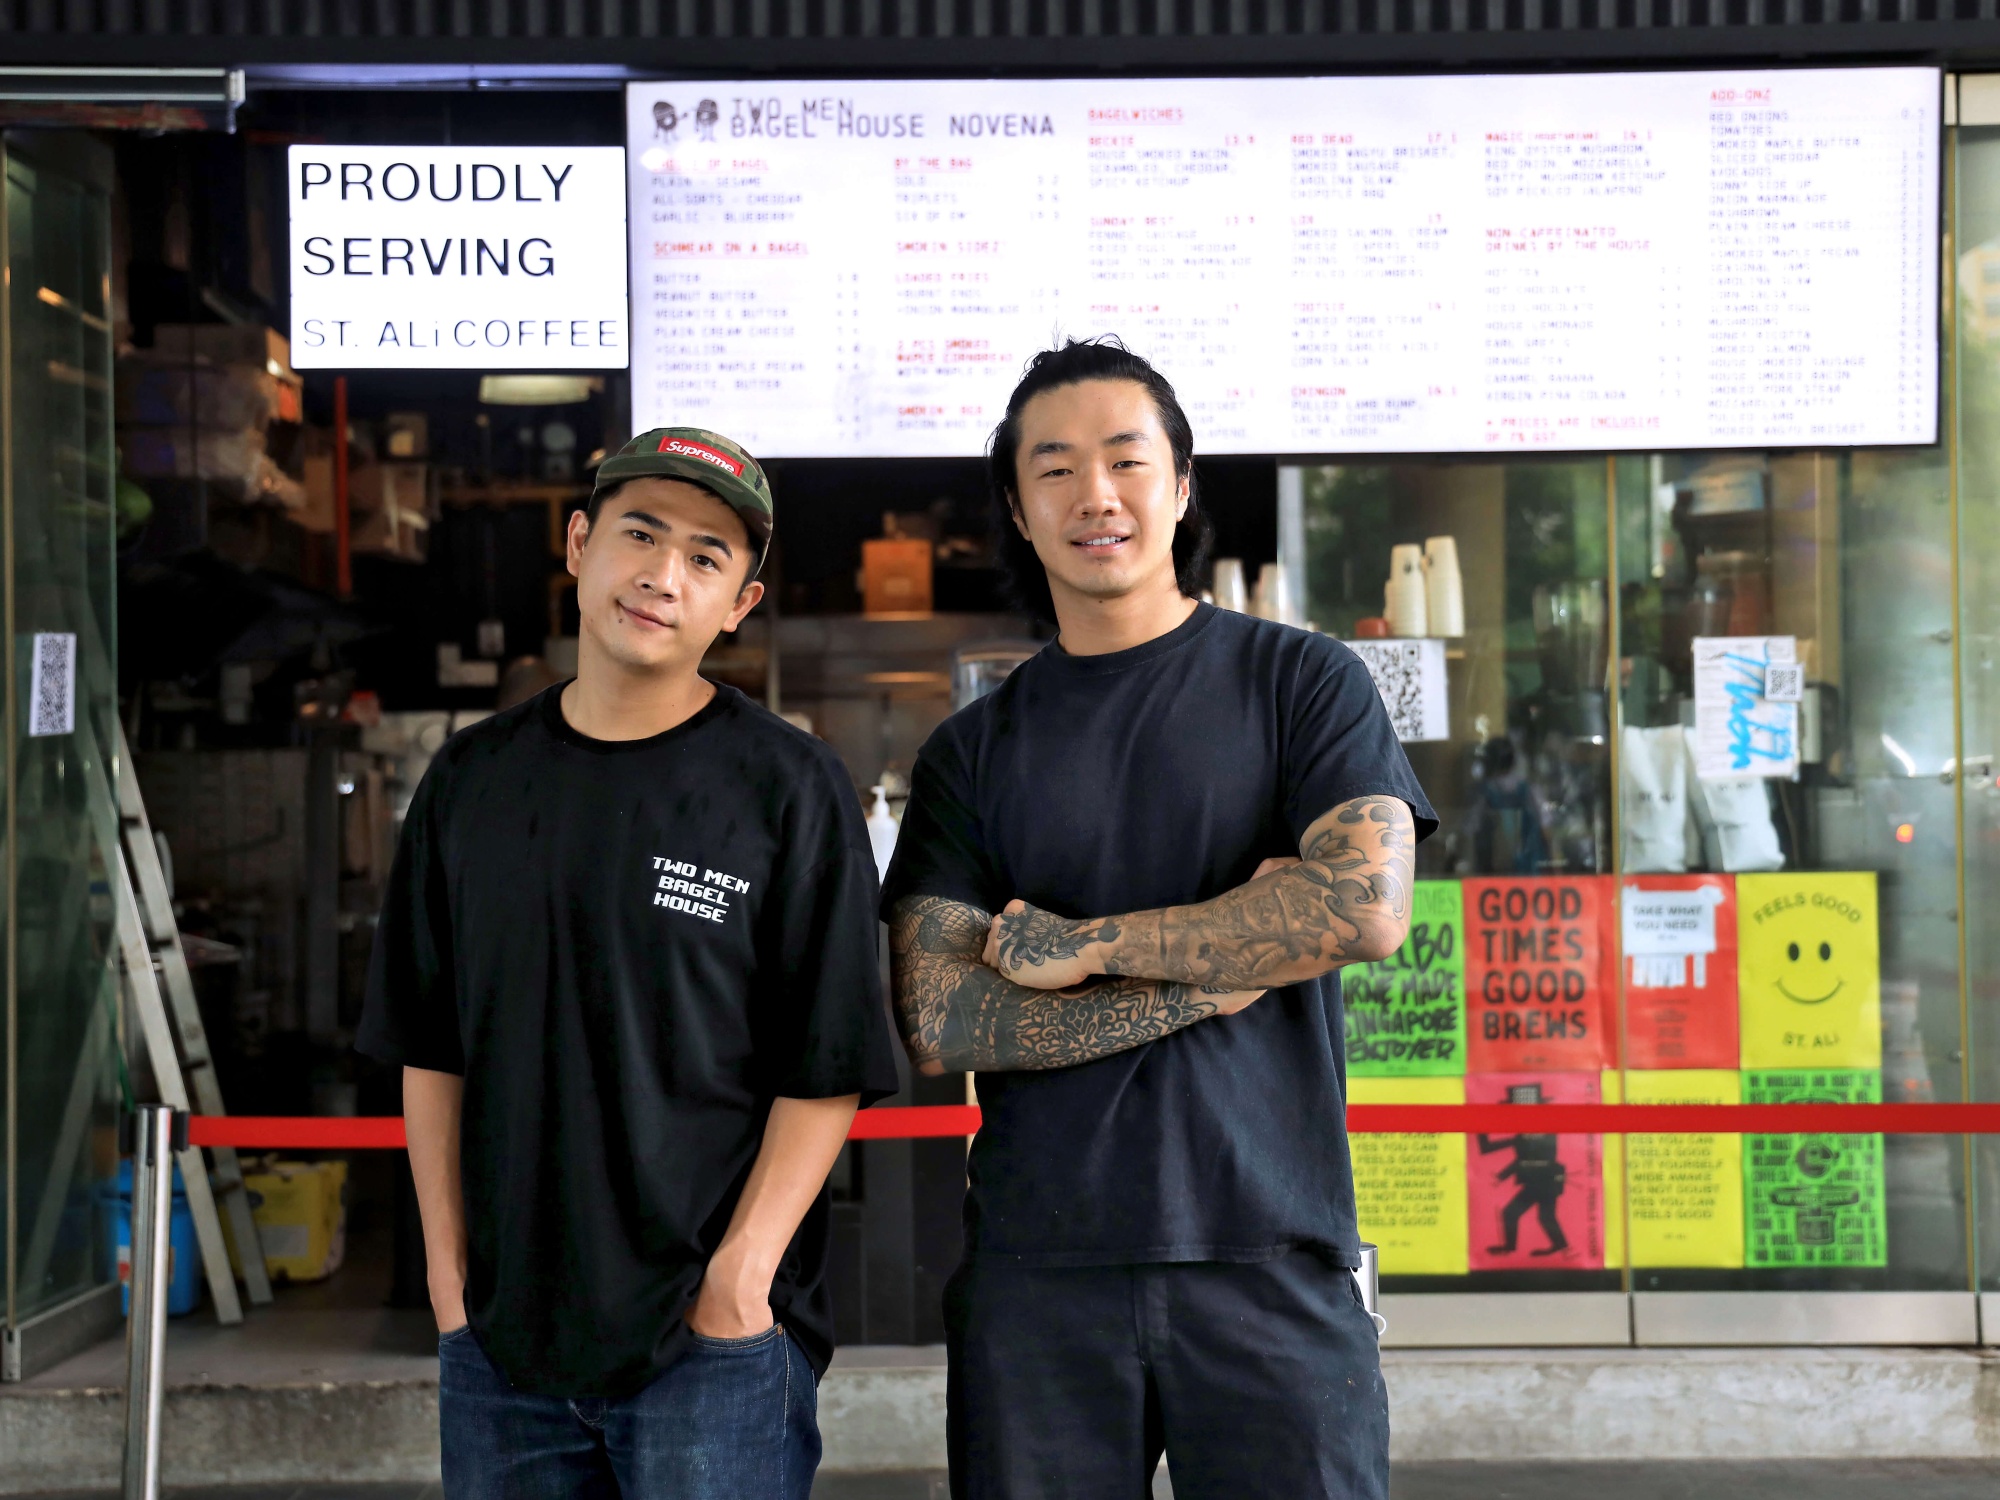 20 Questions with Two Men Bagel House’s Jereborne Lam and Jerome Lam